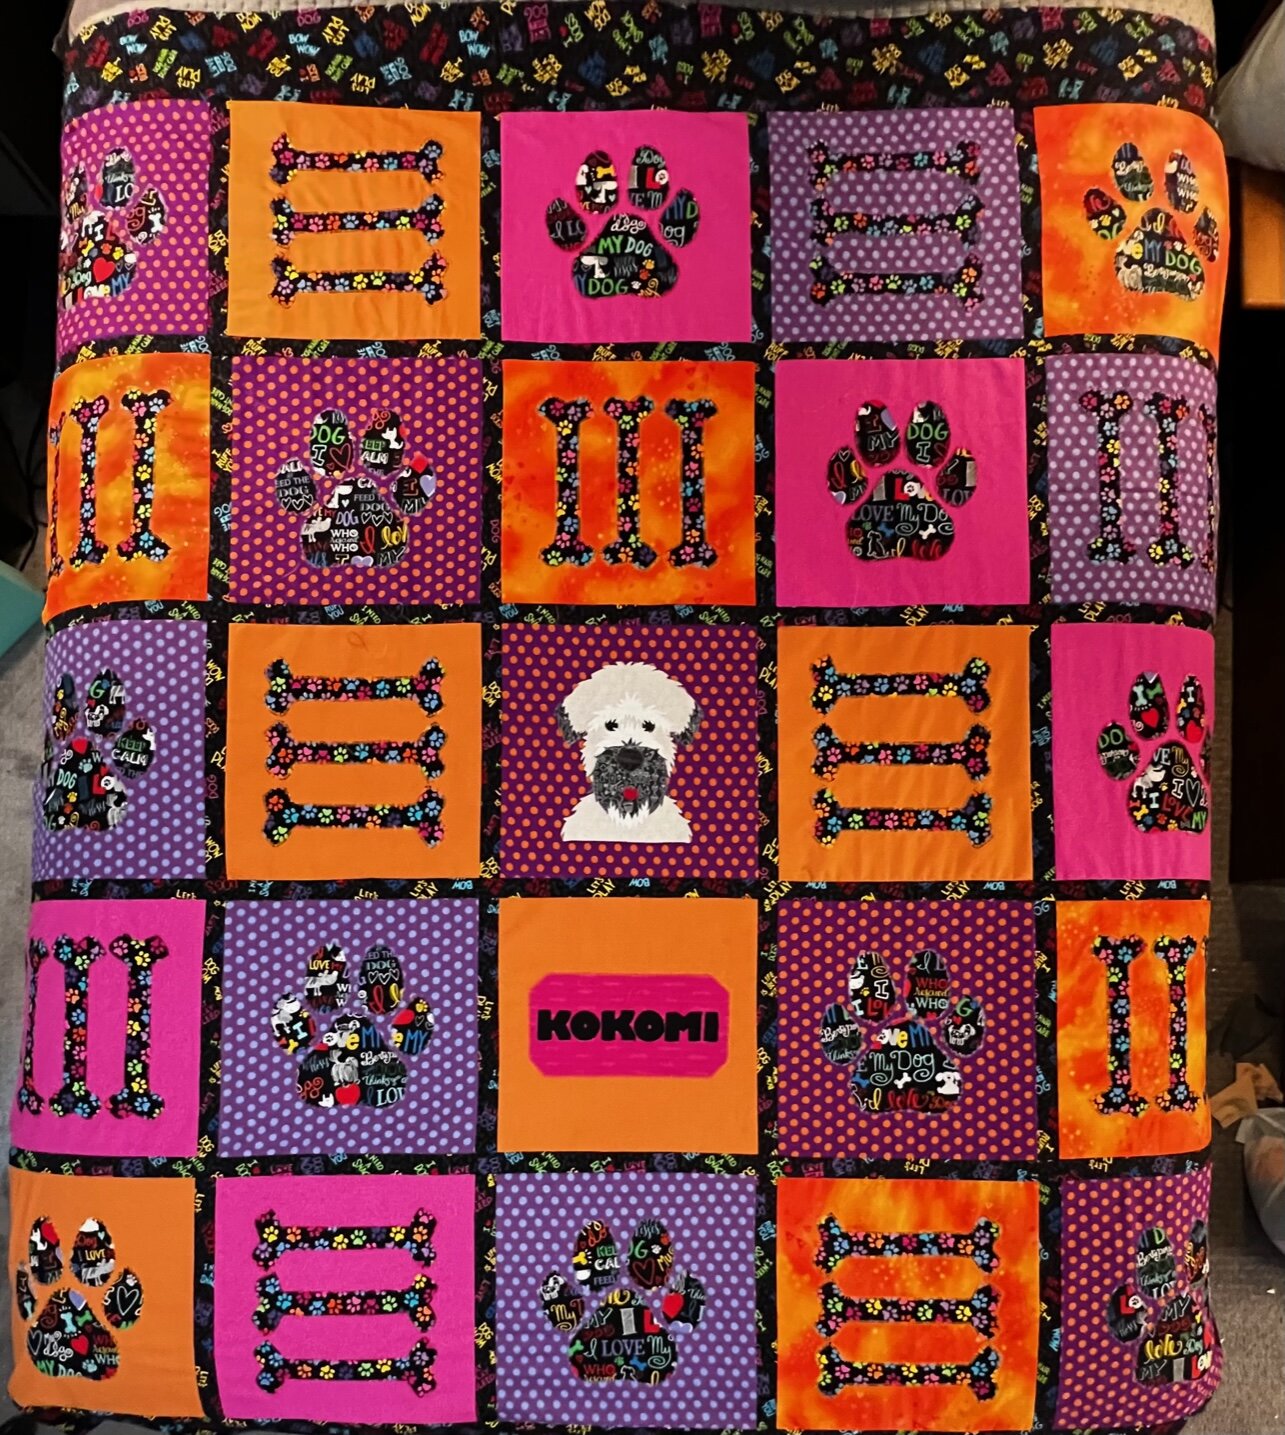 A quilt made by Diane Morris, which was gifted to her niece, to celebrate her dog. 